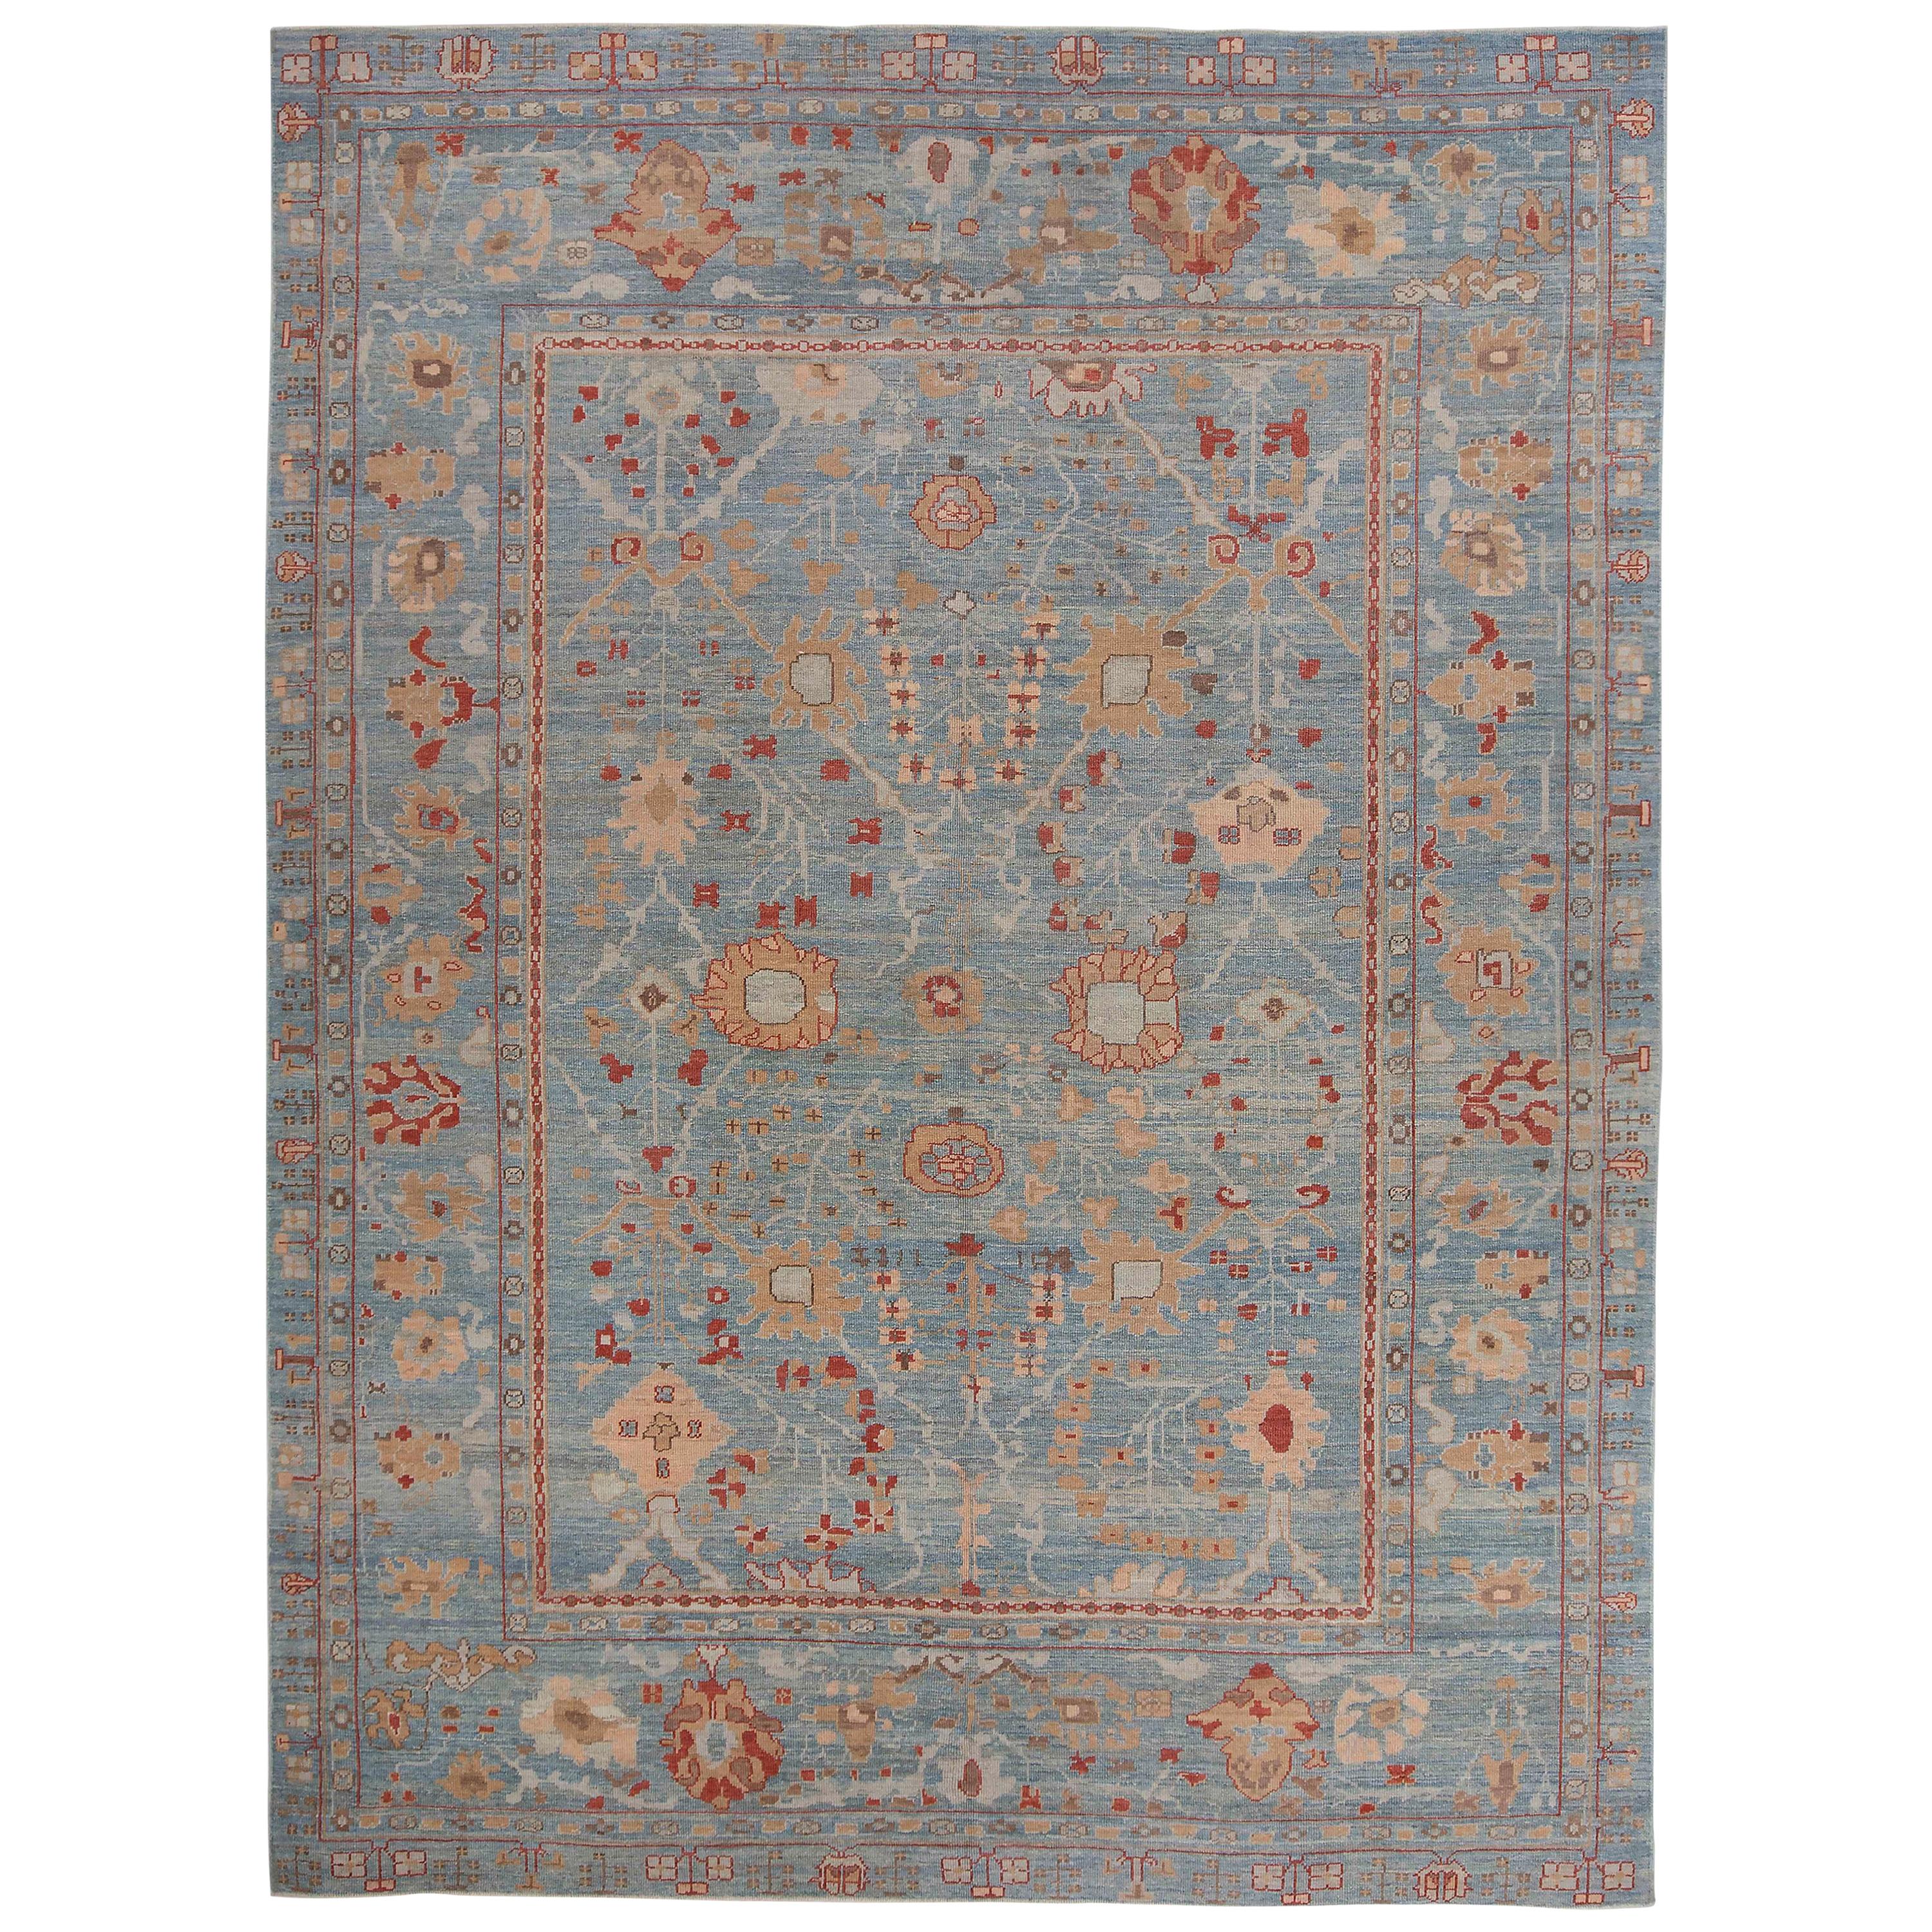 New Turkish Oushak Rug with Red & Brown Floral Details on Blue Gray Field